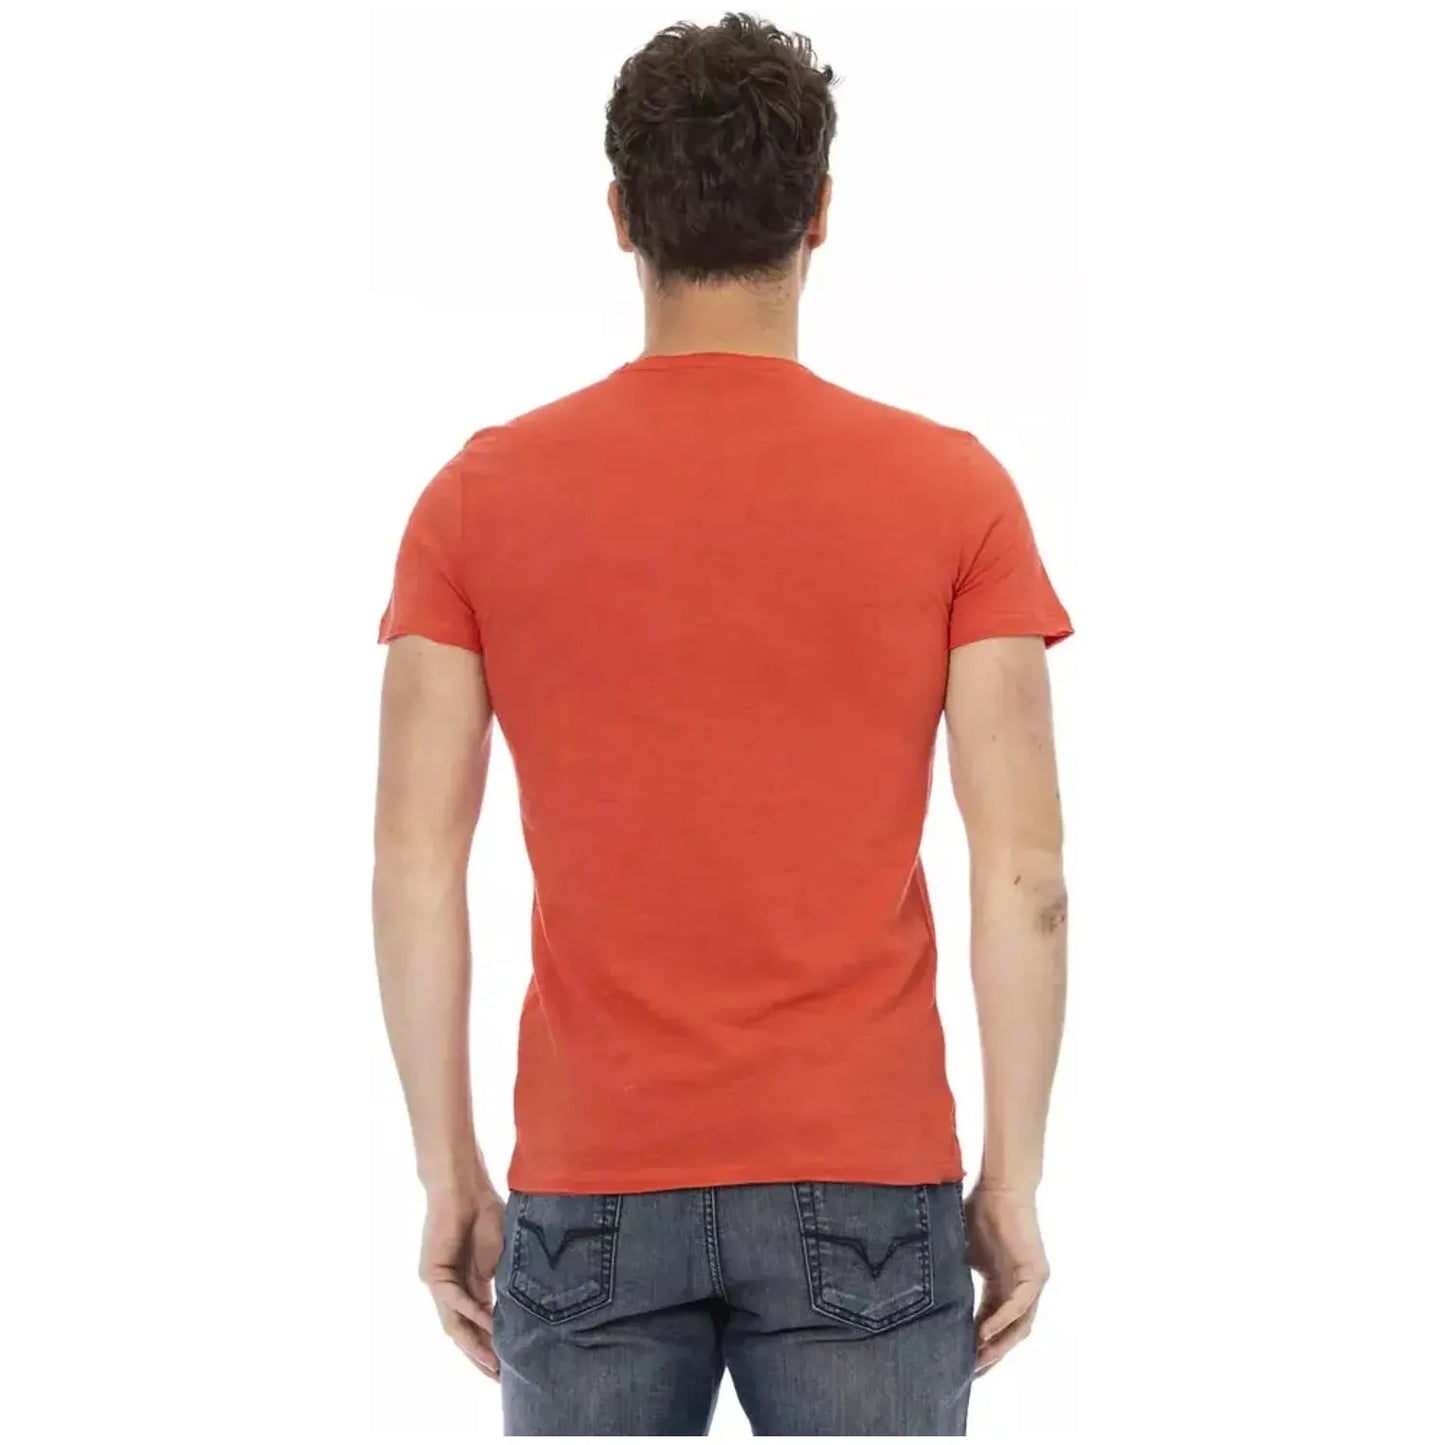 Trussardi Action Sleek Red Round Neck Tee with Front Print red-cotton-t-shirt-32